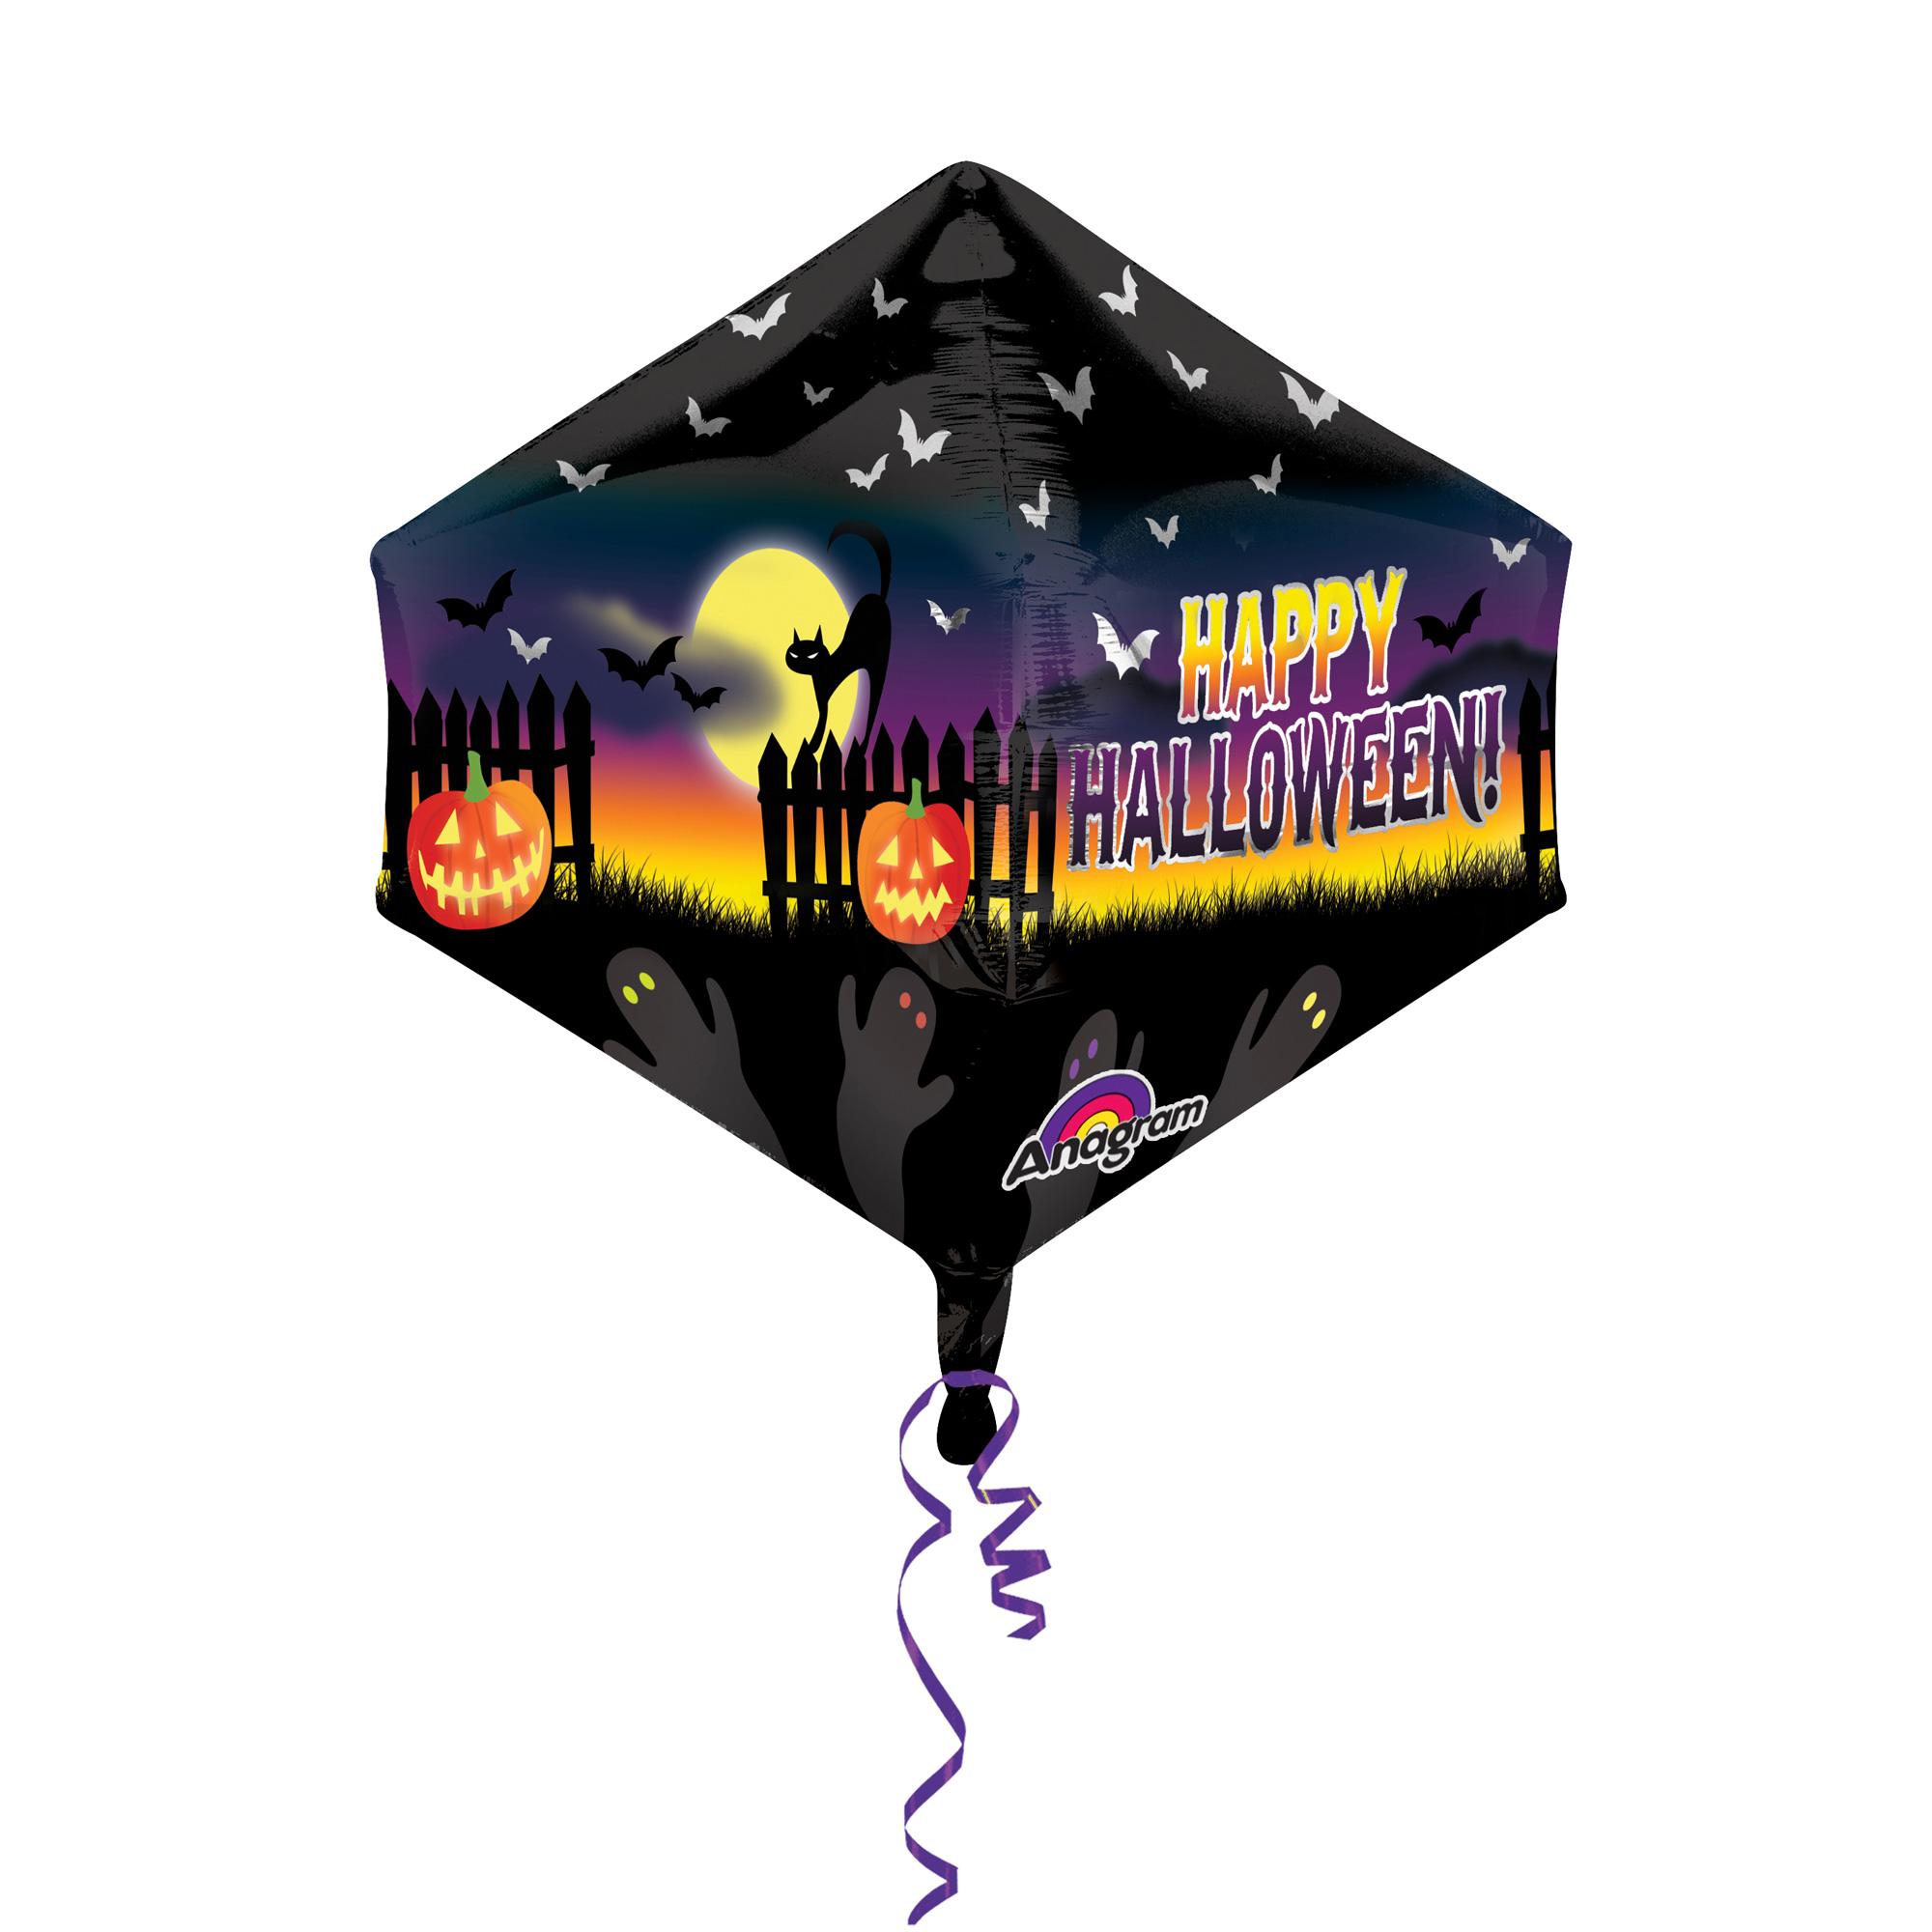 Haunted Halloween Scene Anglez Foil Balloon 17x21in Balloons & Streamers - Party Centre - Party Centre